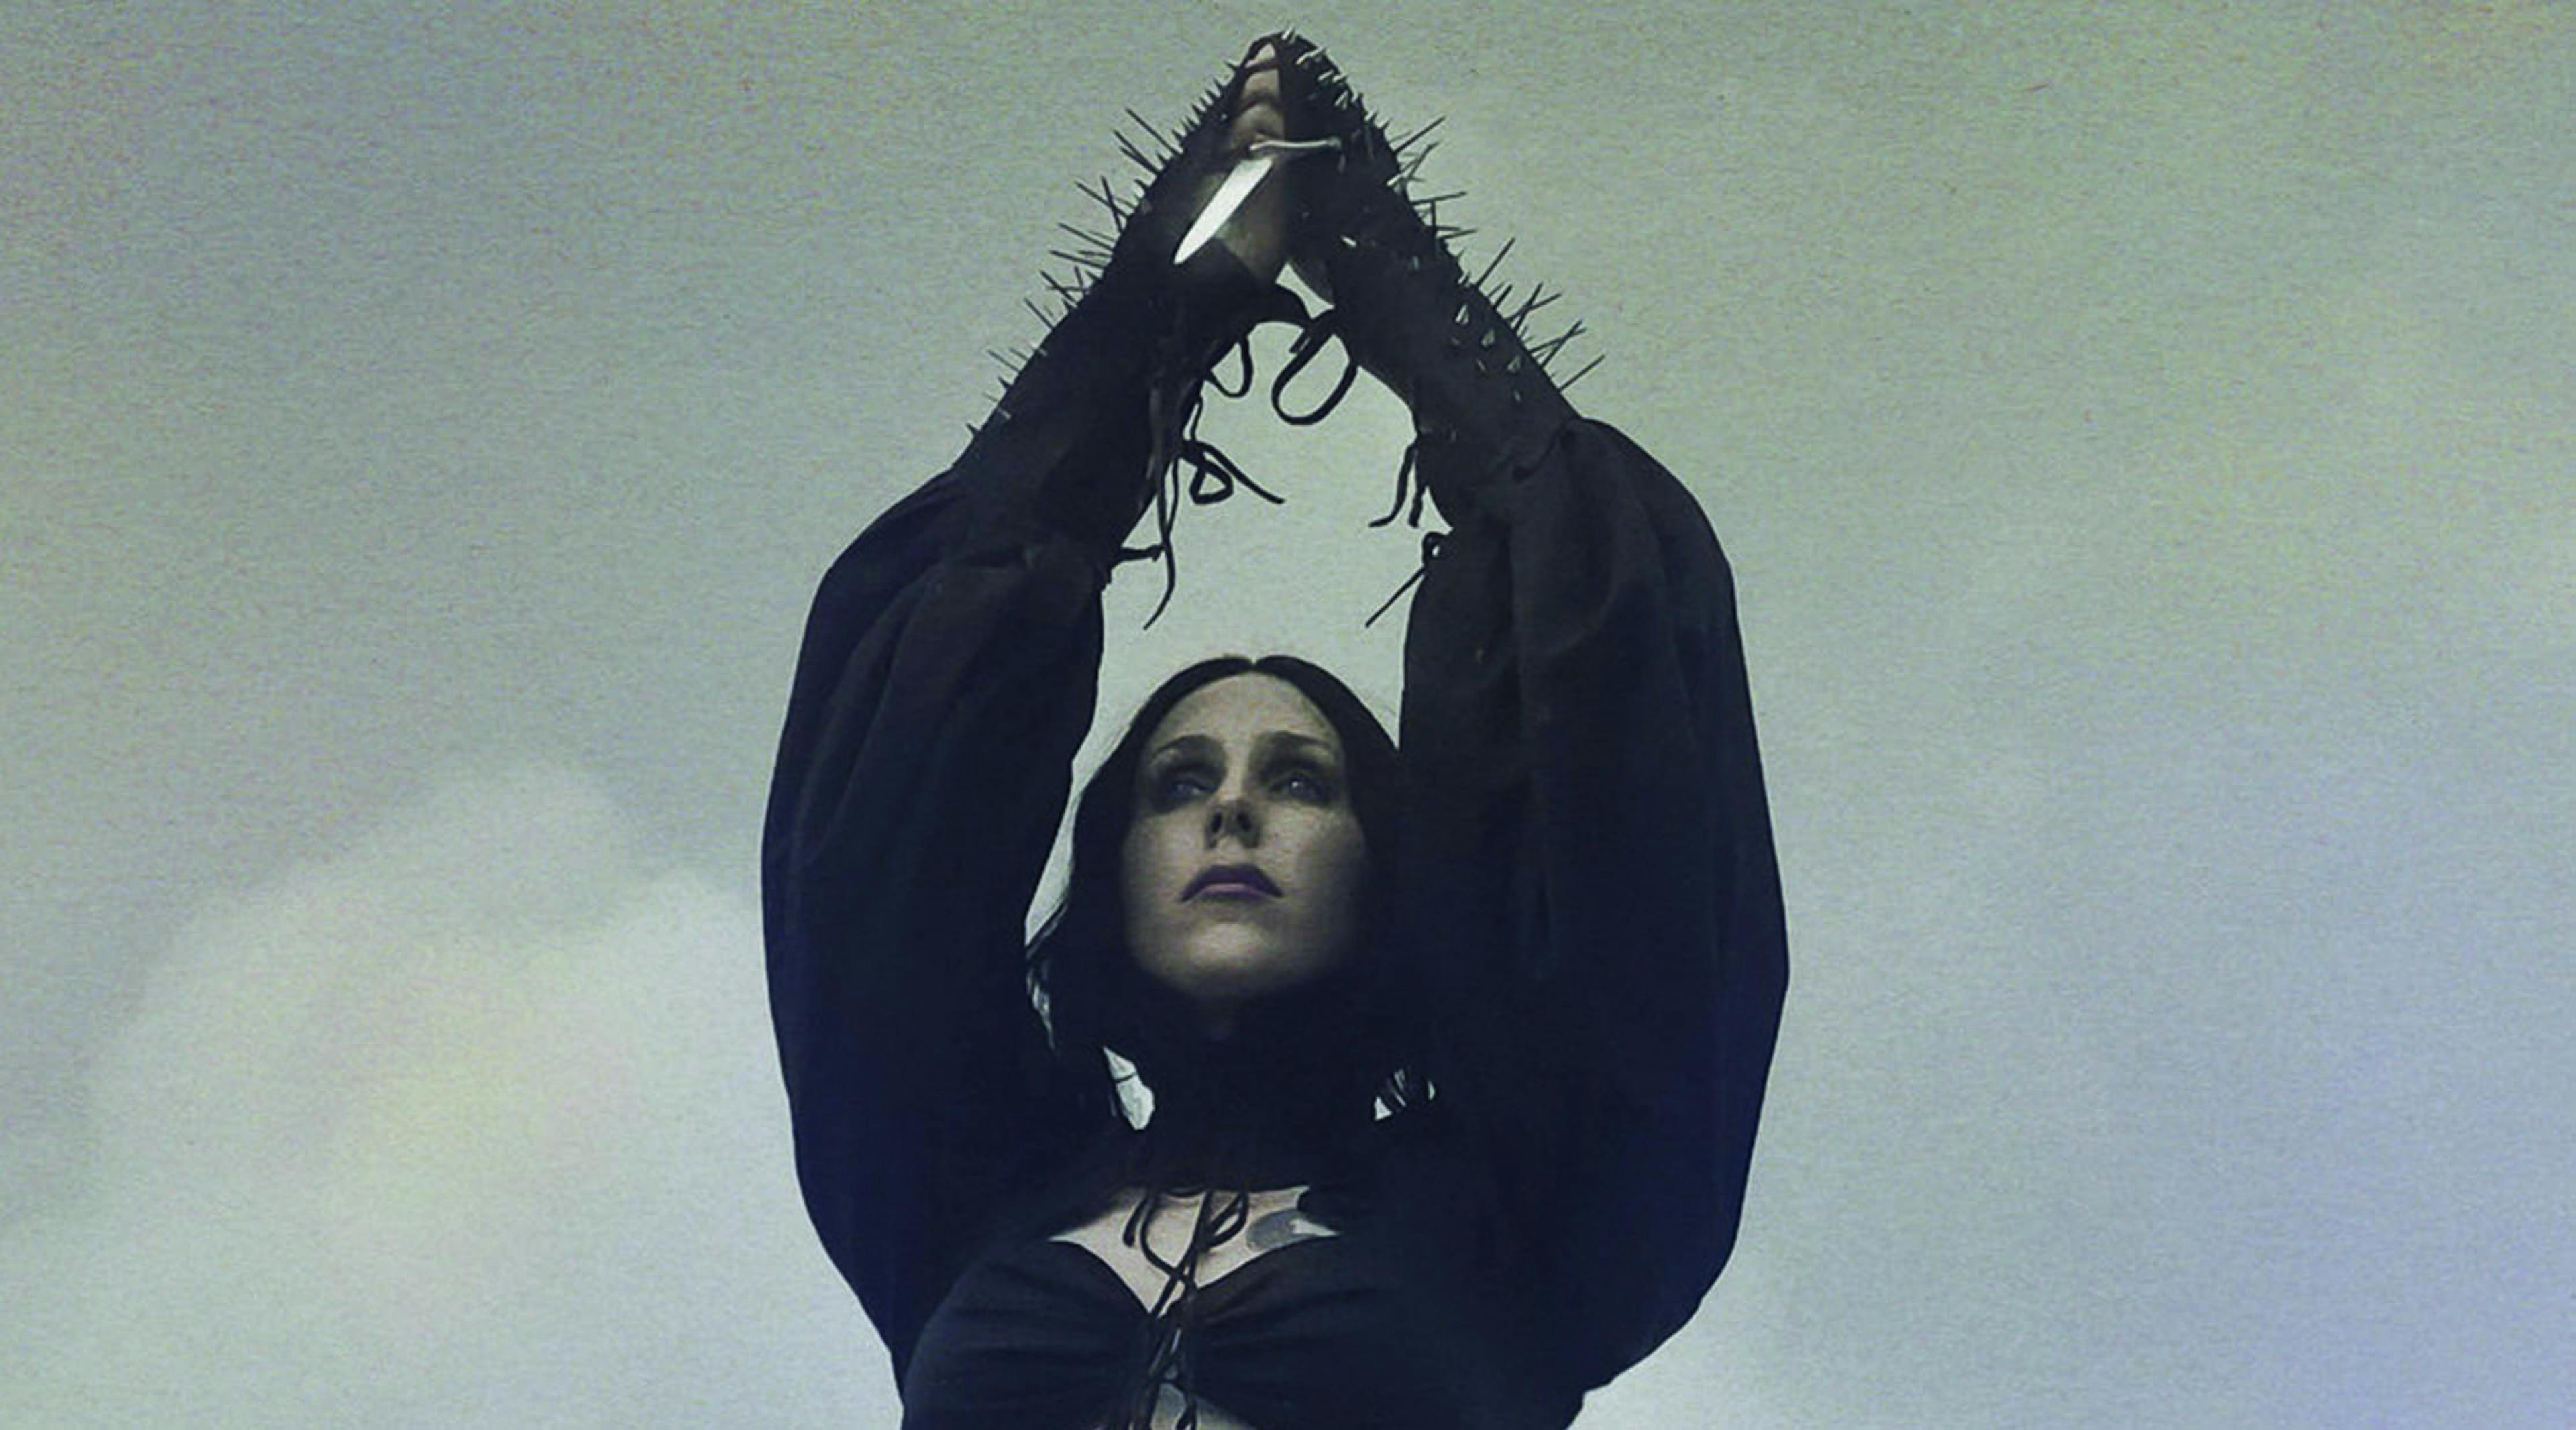 Chelsea Wolfe Announces UK and Europe Acoustic Tour